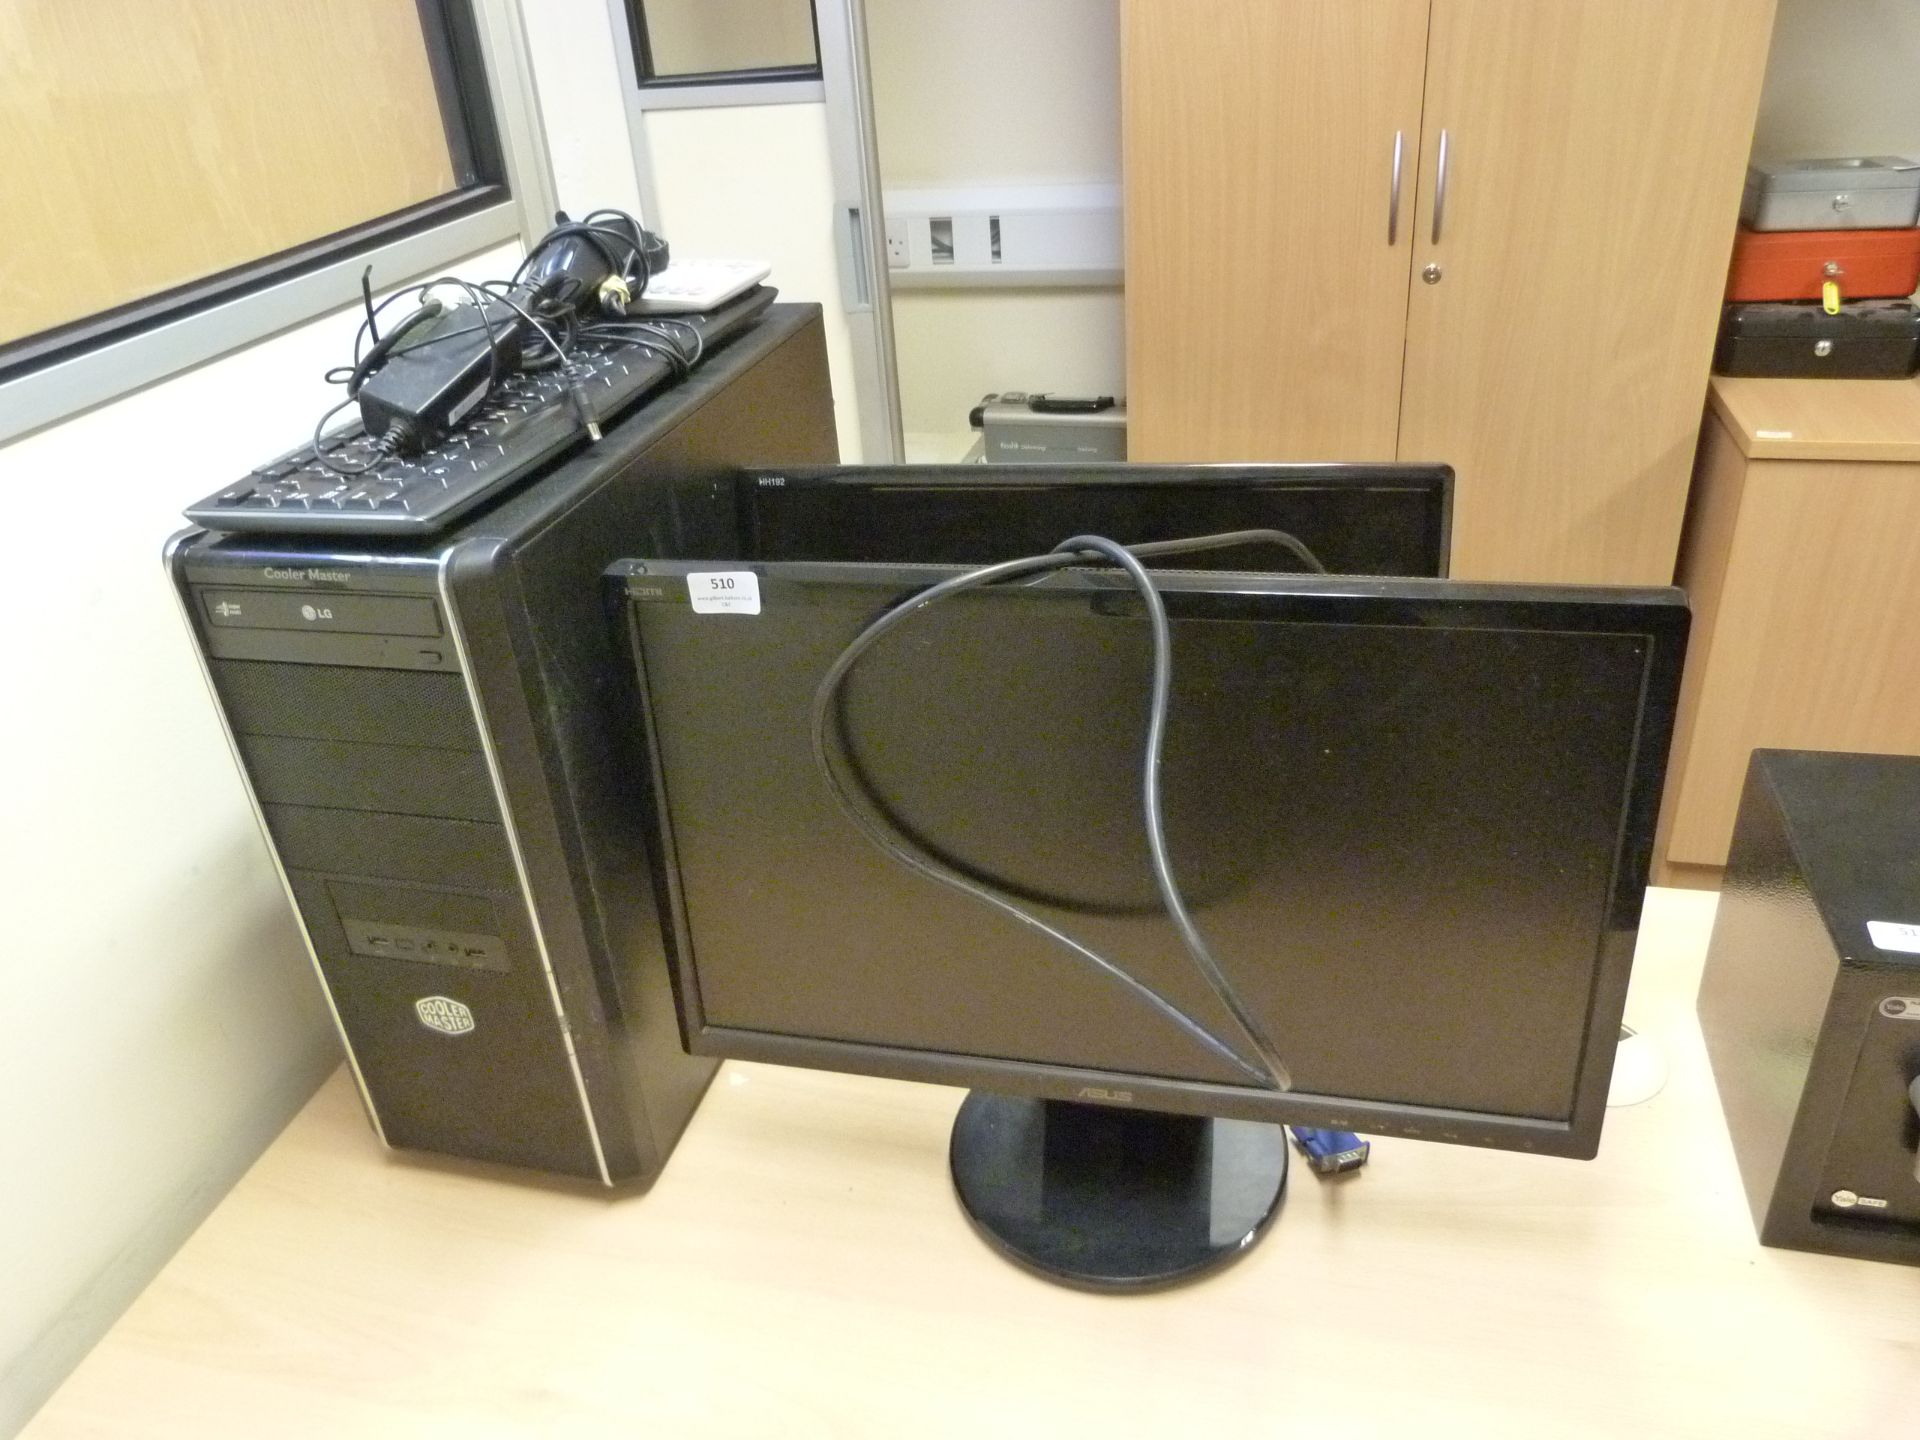 *Coolermaster Desktop PC with Hanns G Monitor, Asus Monitor, Keyboard and Mouse